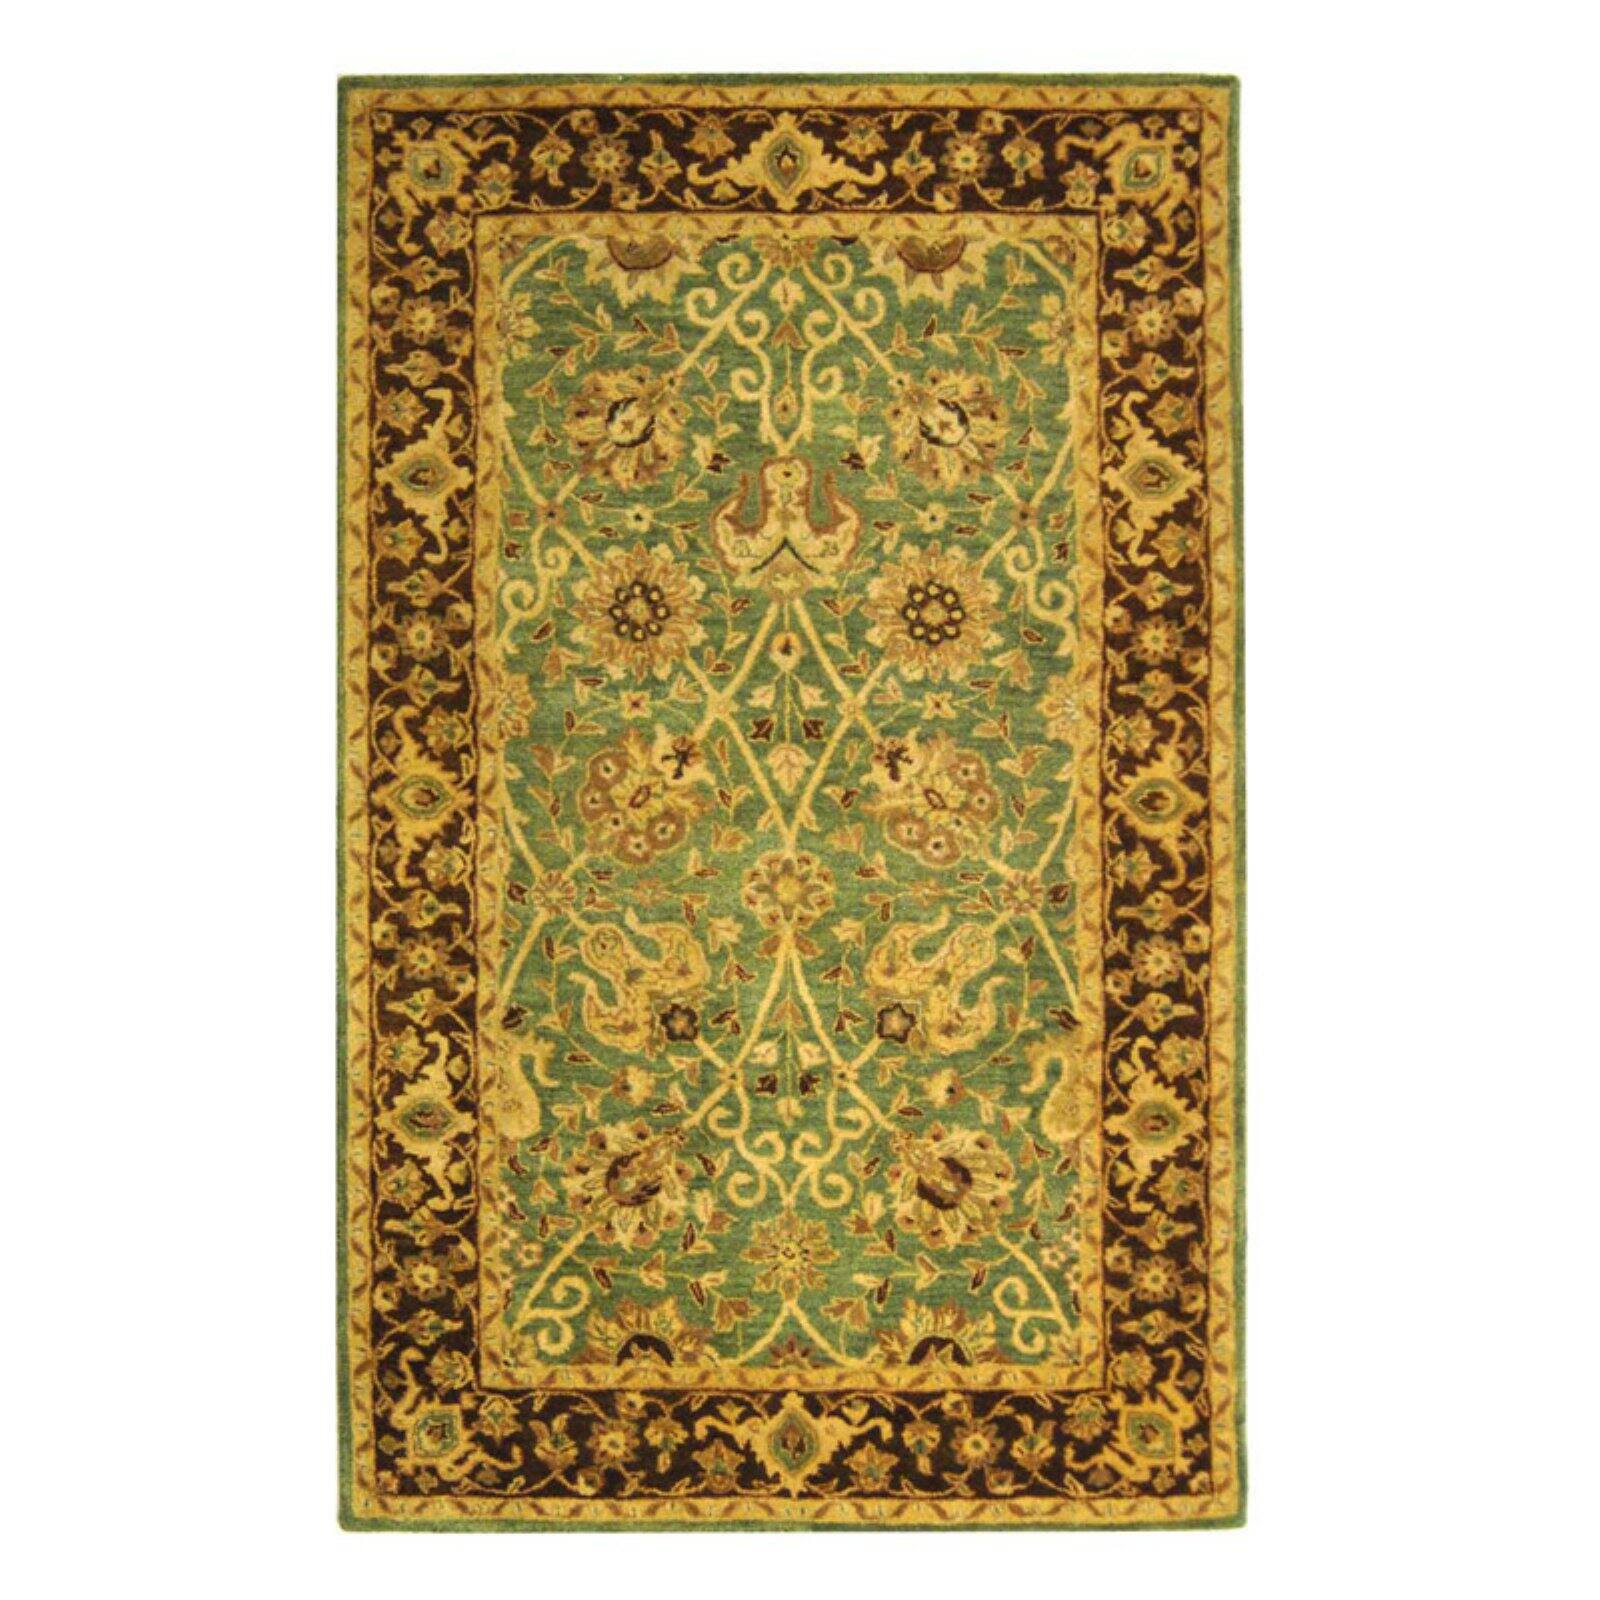 SAFAVIEH Antiquity Lilibeth Traditional Floral Wool Runner Rug, Green/Brown, 2'3" x 8' - image 4 of 8